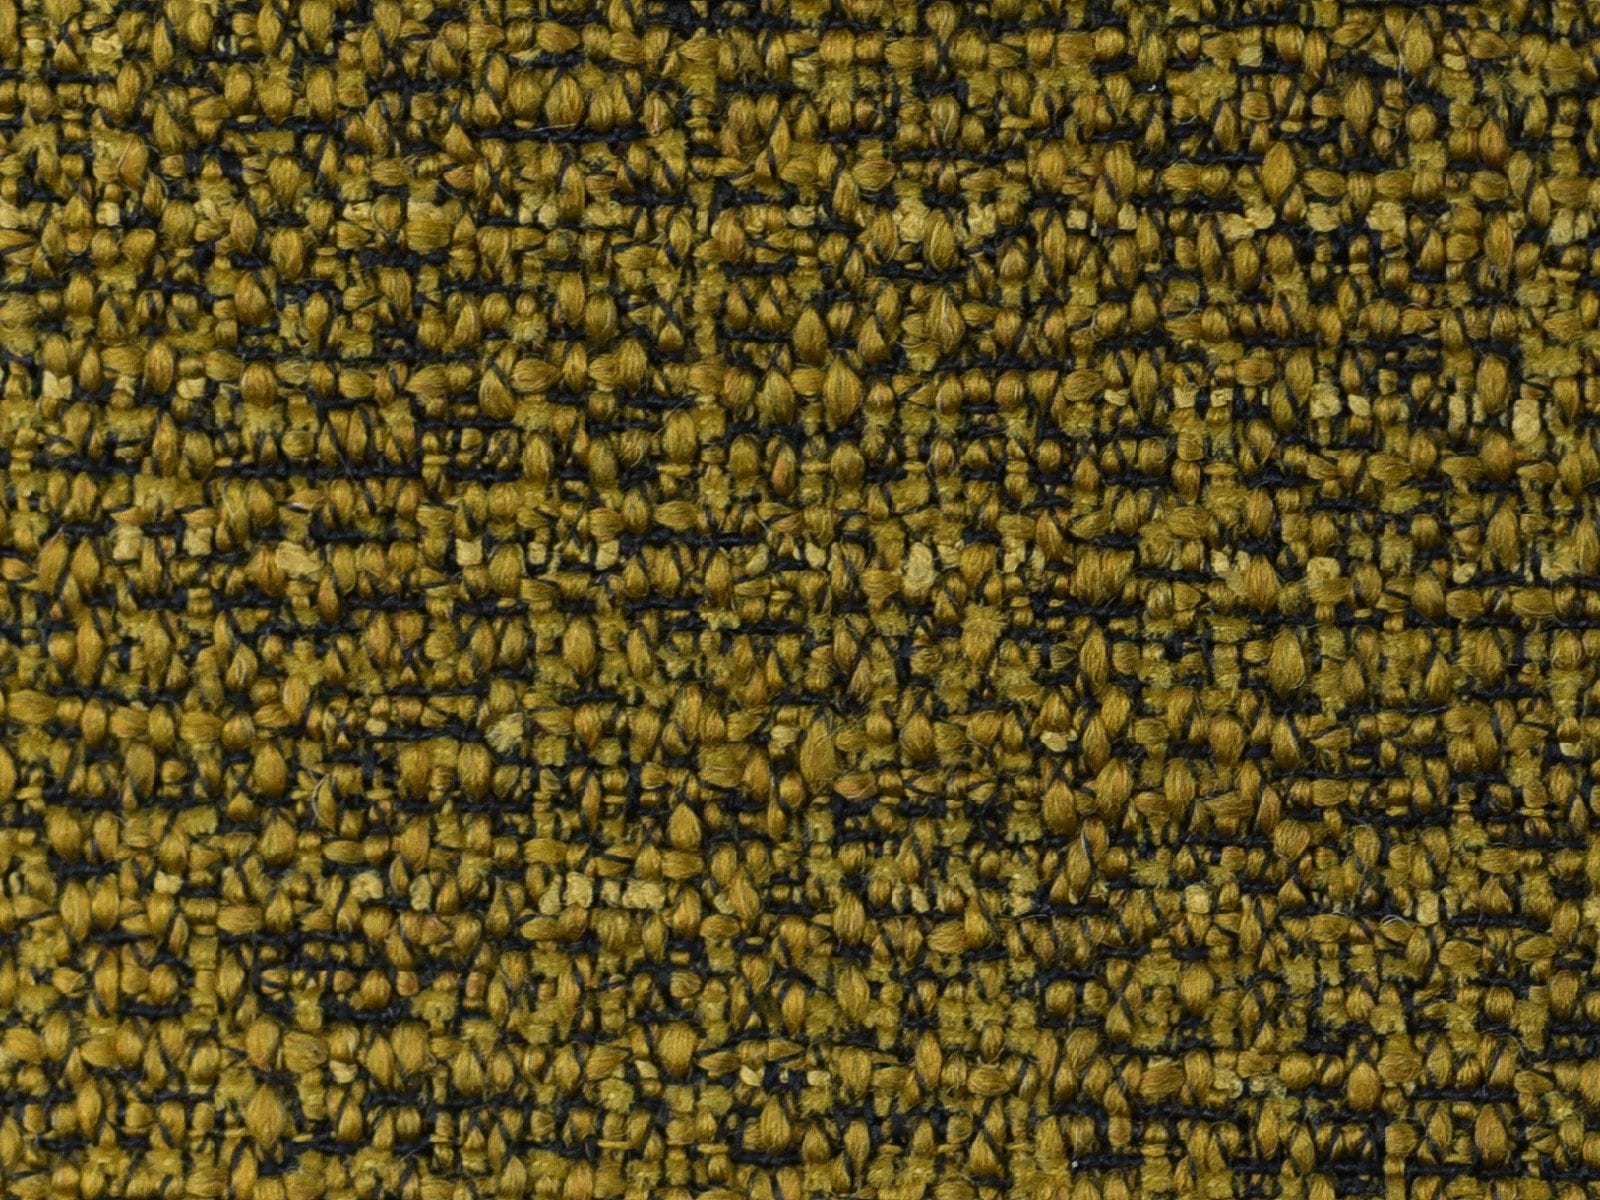 Contemporary Coarse Woven Textured Upholstery Fabric By The Yard 57"W/600GSM-Capability Harvest Gold